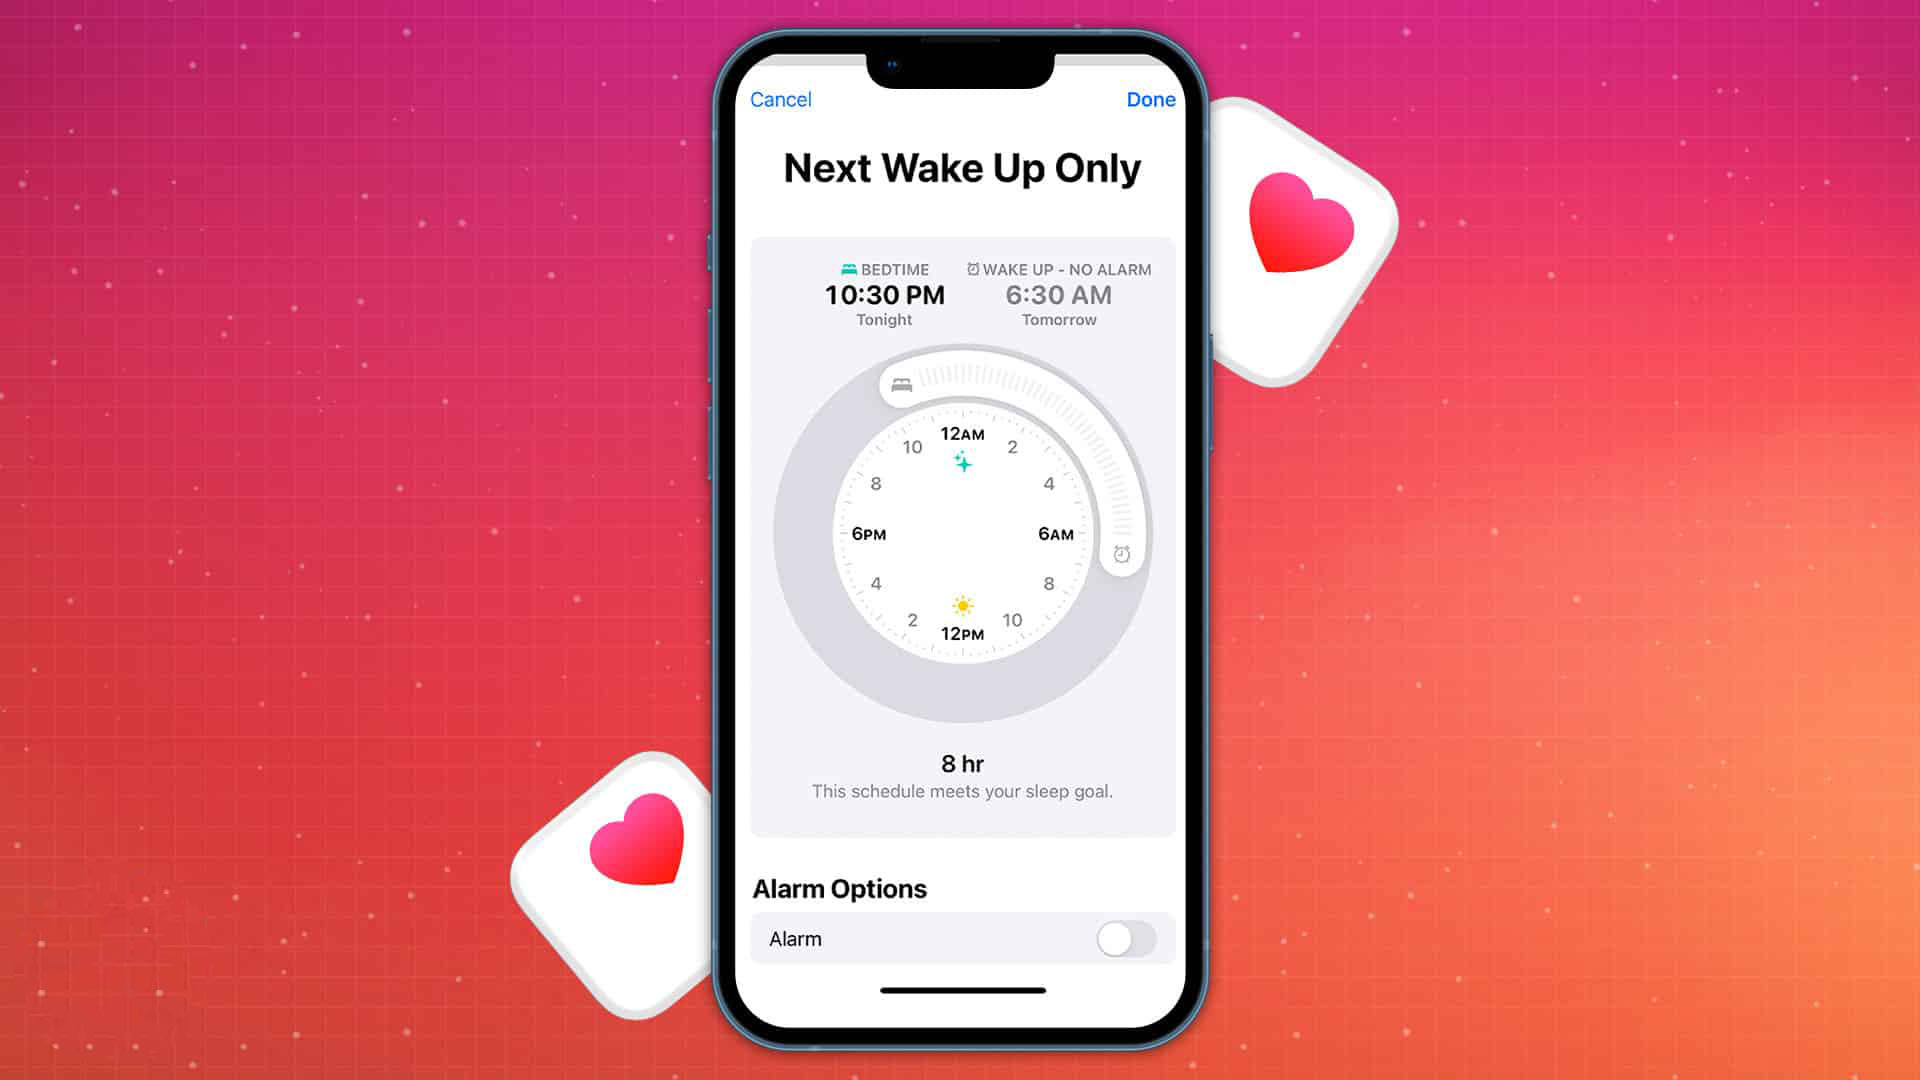 How to delete sleep schedules in Health app on iPhone